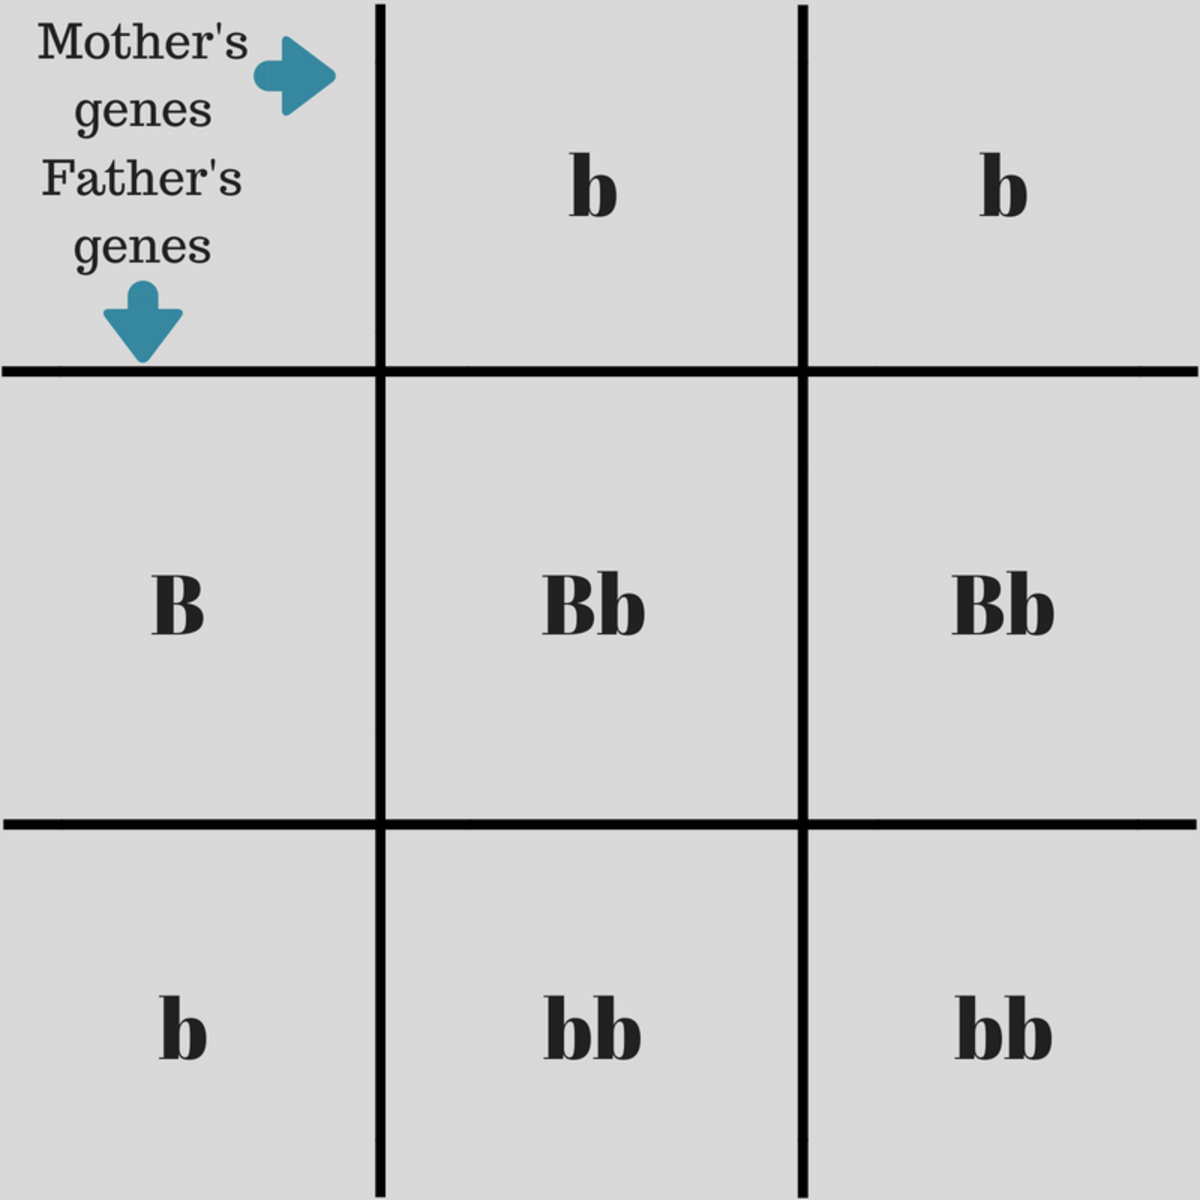 A basic example of a Punnett square, with the parent's alleles on the outside of the square with the potential offspring's alleles on the inside. 